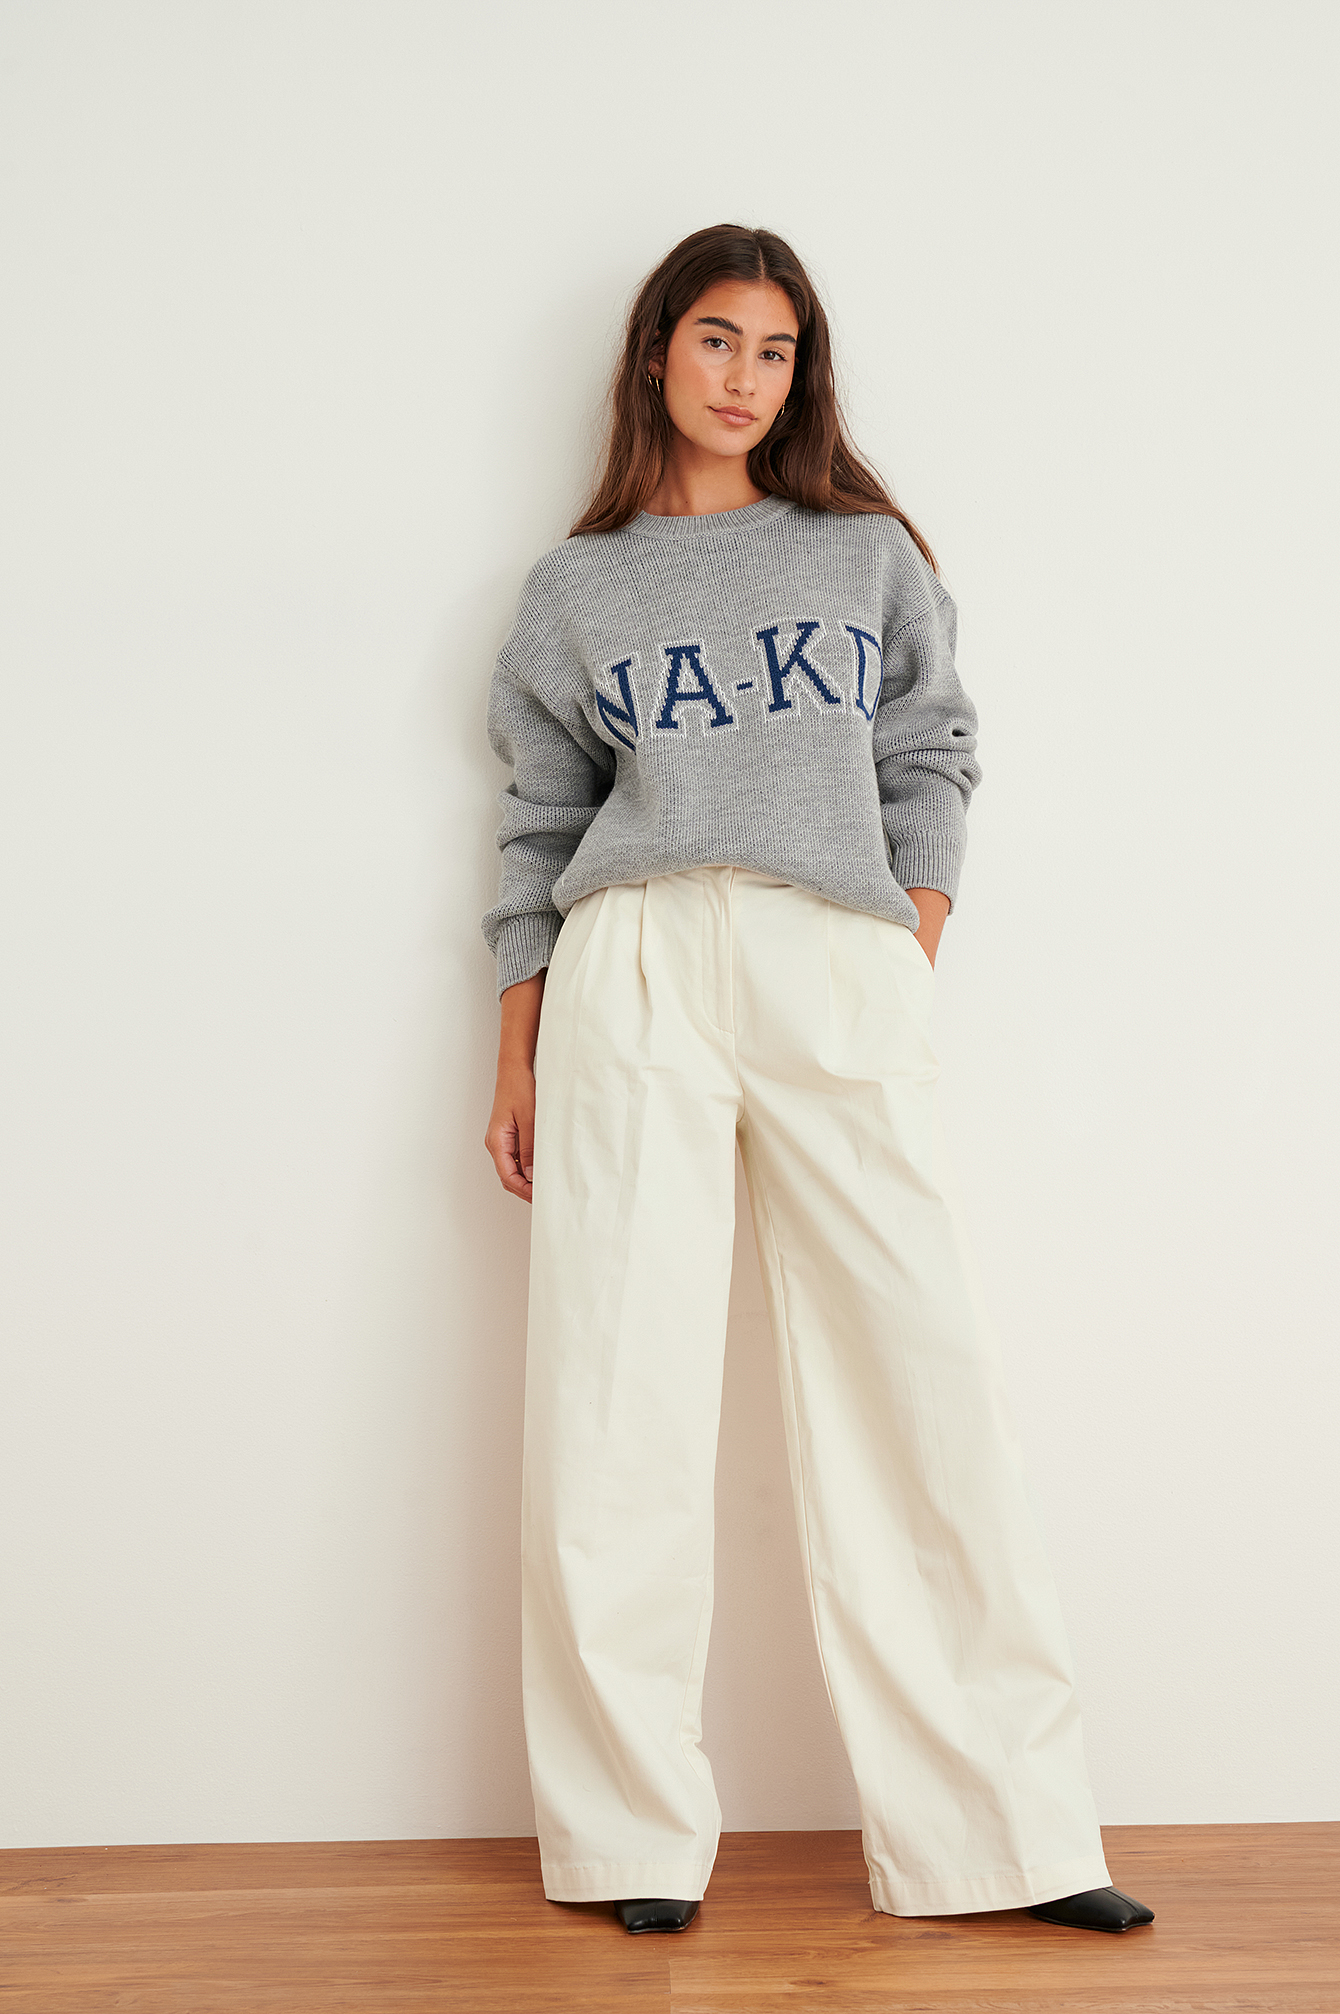 Knitted Nakd Sweater Outfit